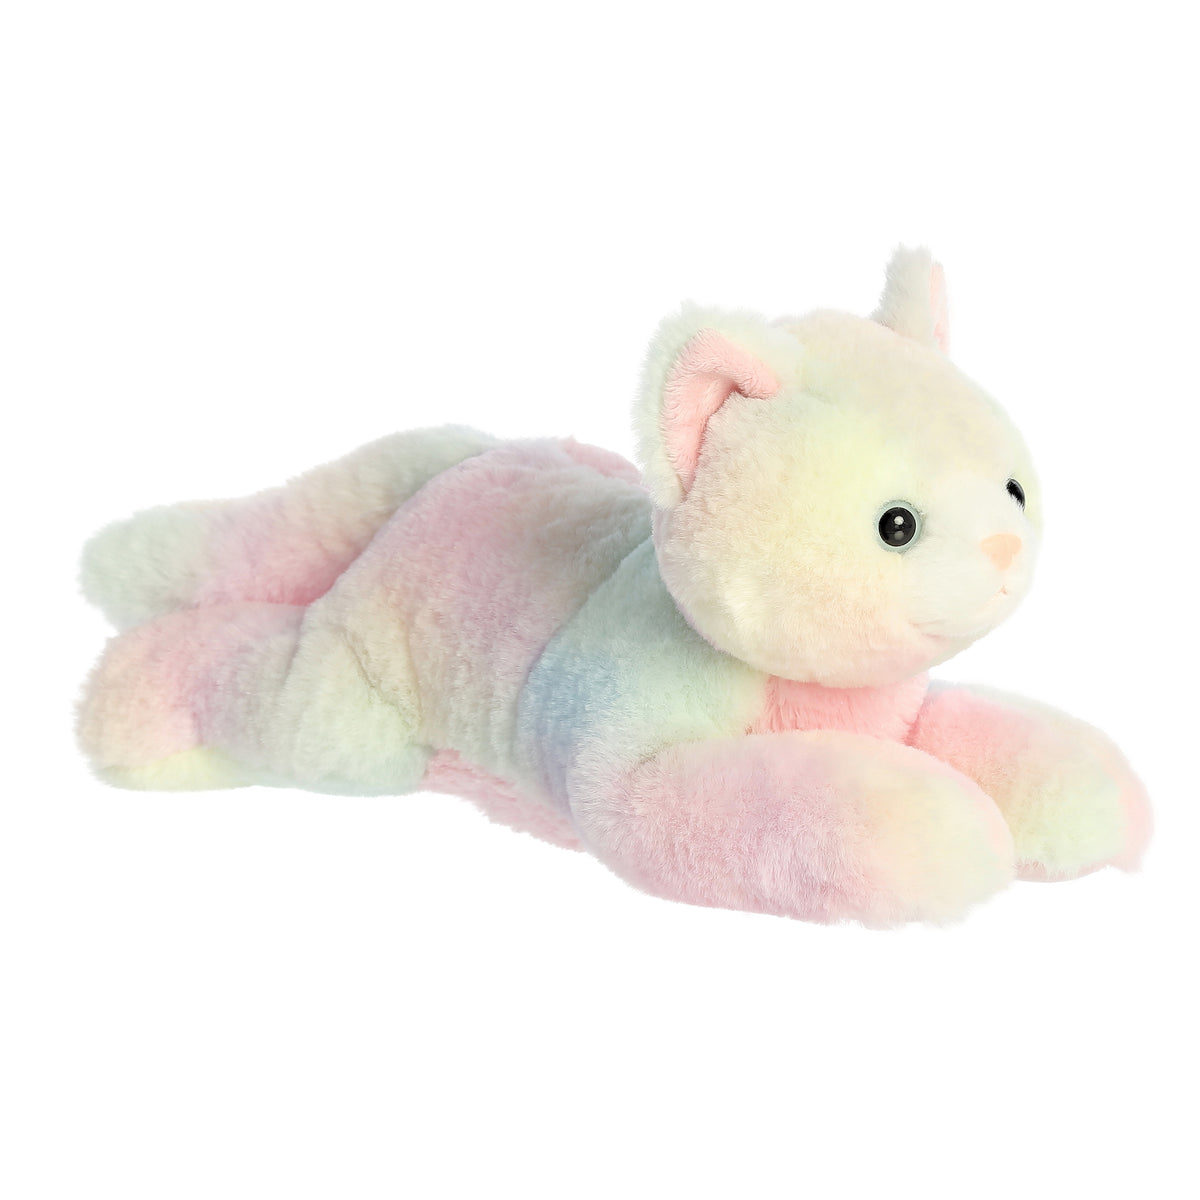 Multicolored Calli Kitten plushie with a blend of soft, light colors, offering enchanting and vibrant adventures to all.